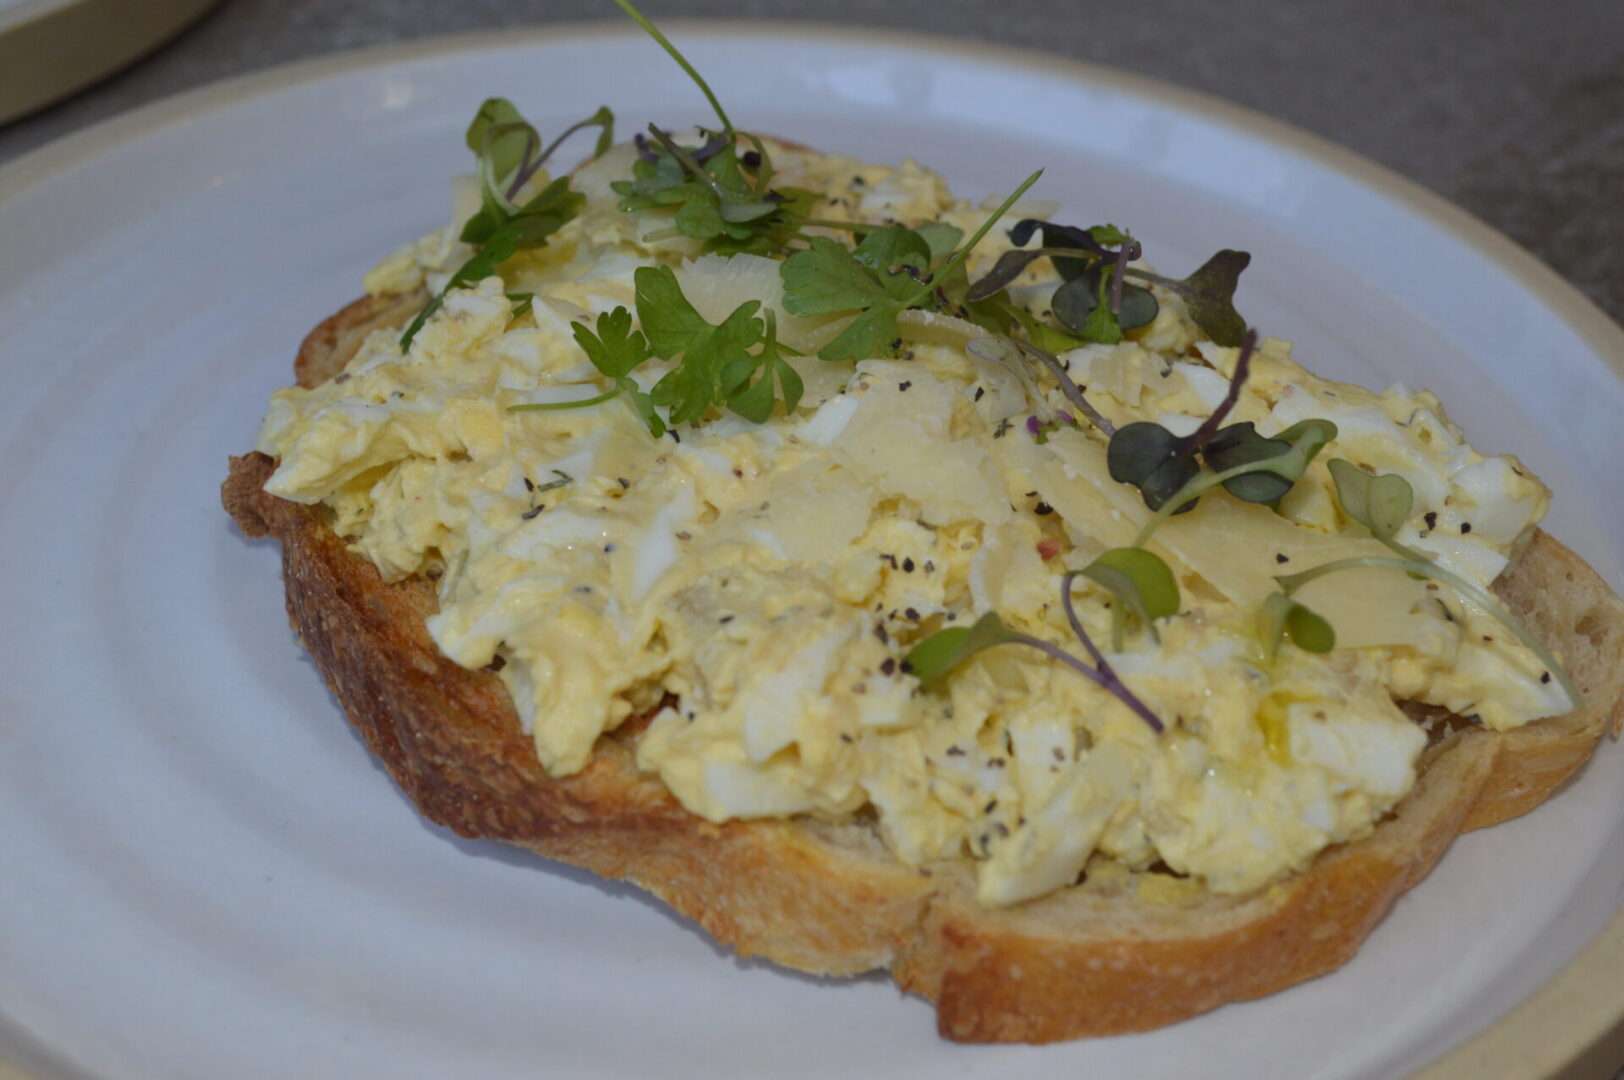 A piece of bread with scrambled eggs on it.